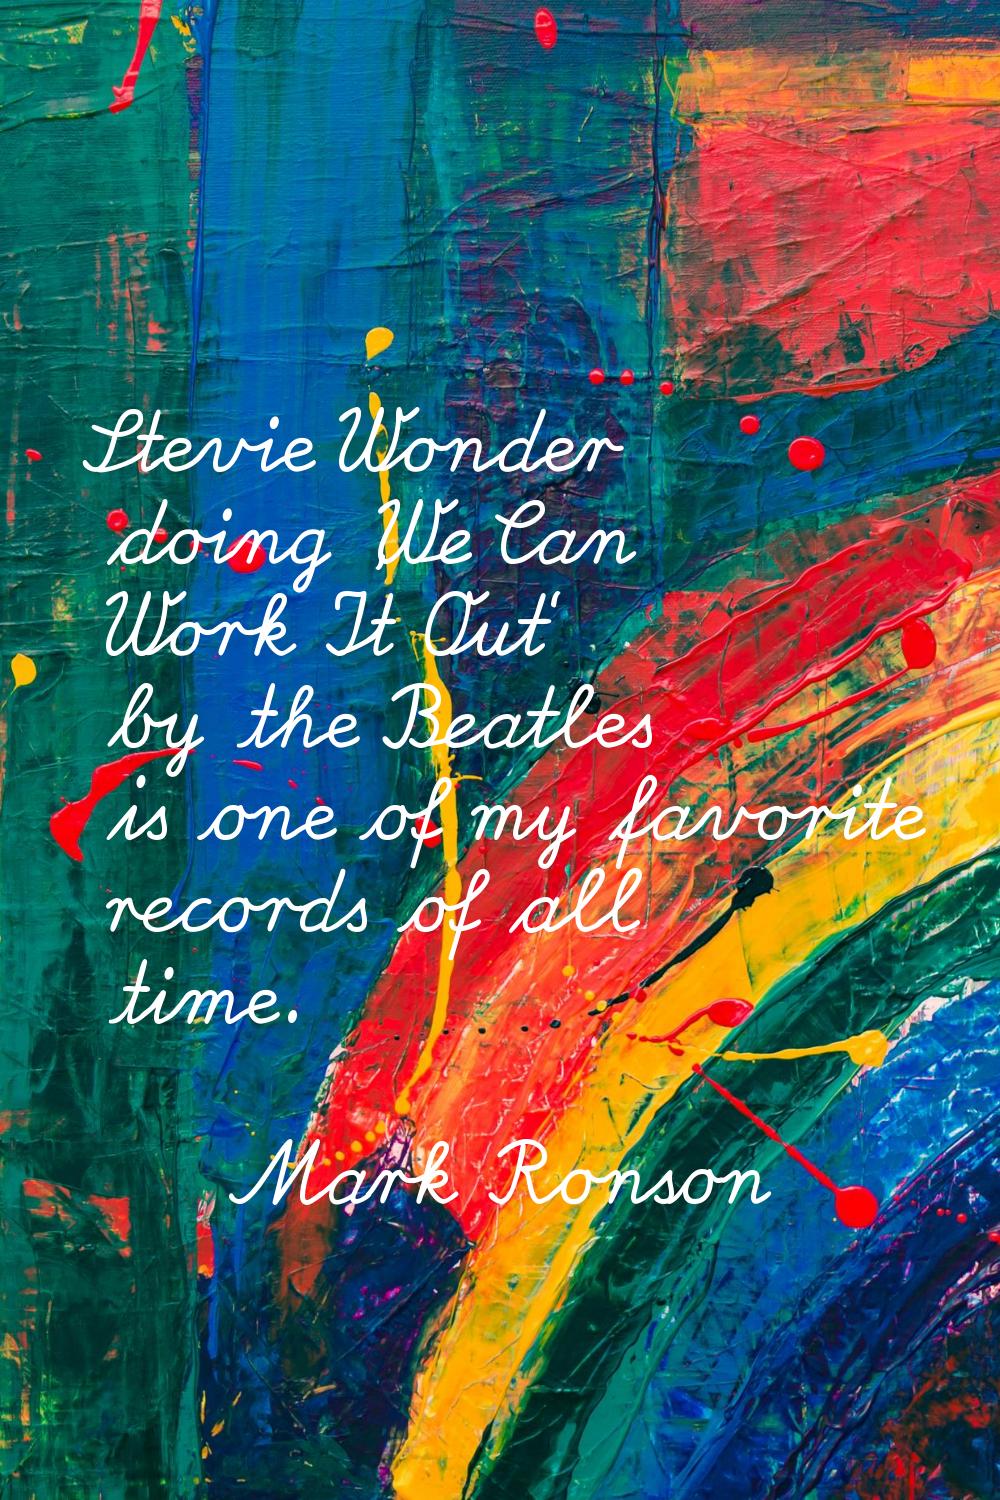 Stevie Wonder doing 'We Can Work It Out' by the Beatles is one of my favorite records of all time.